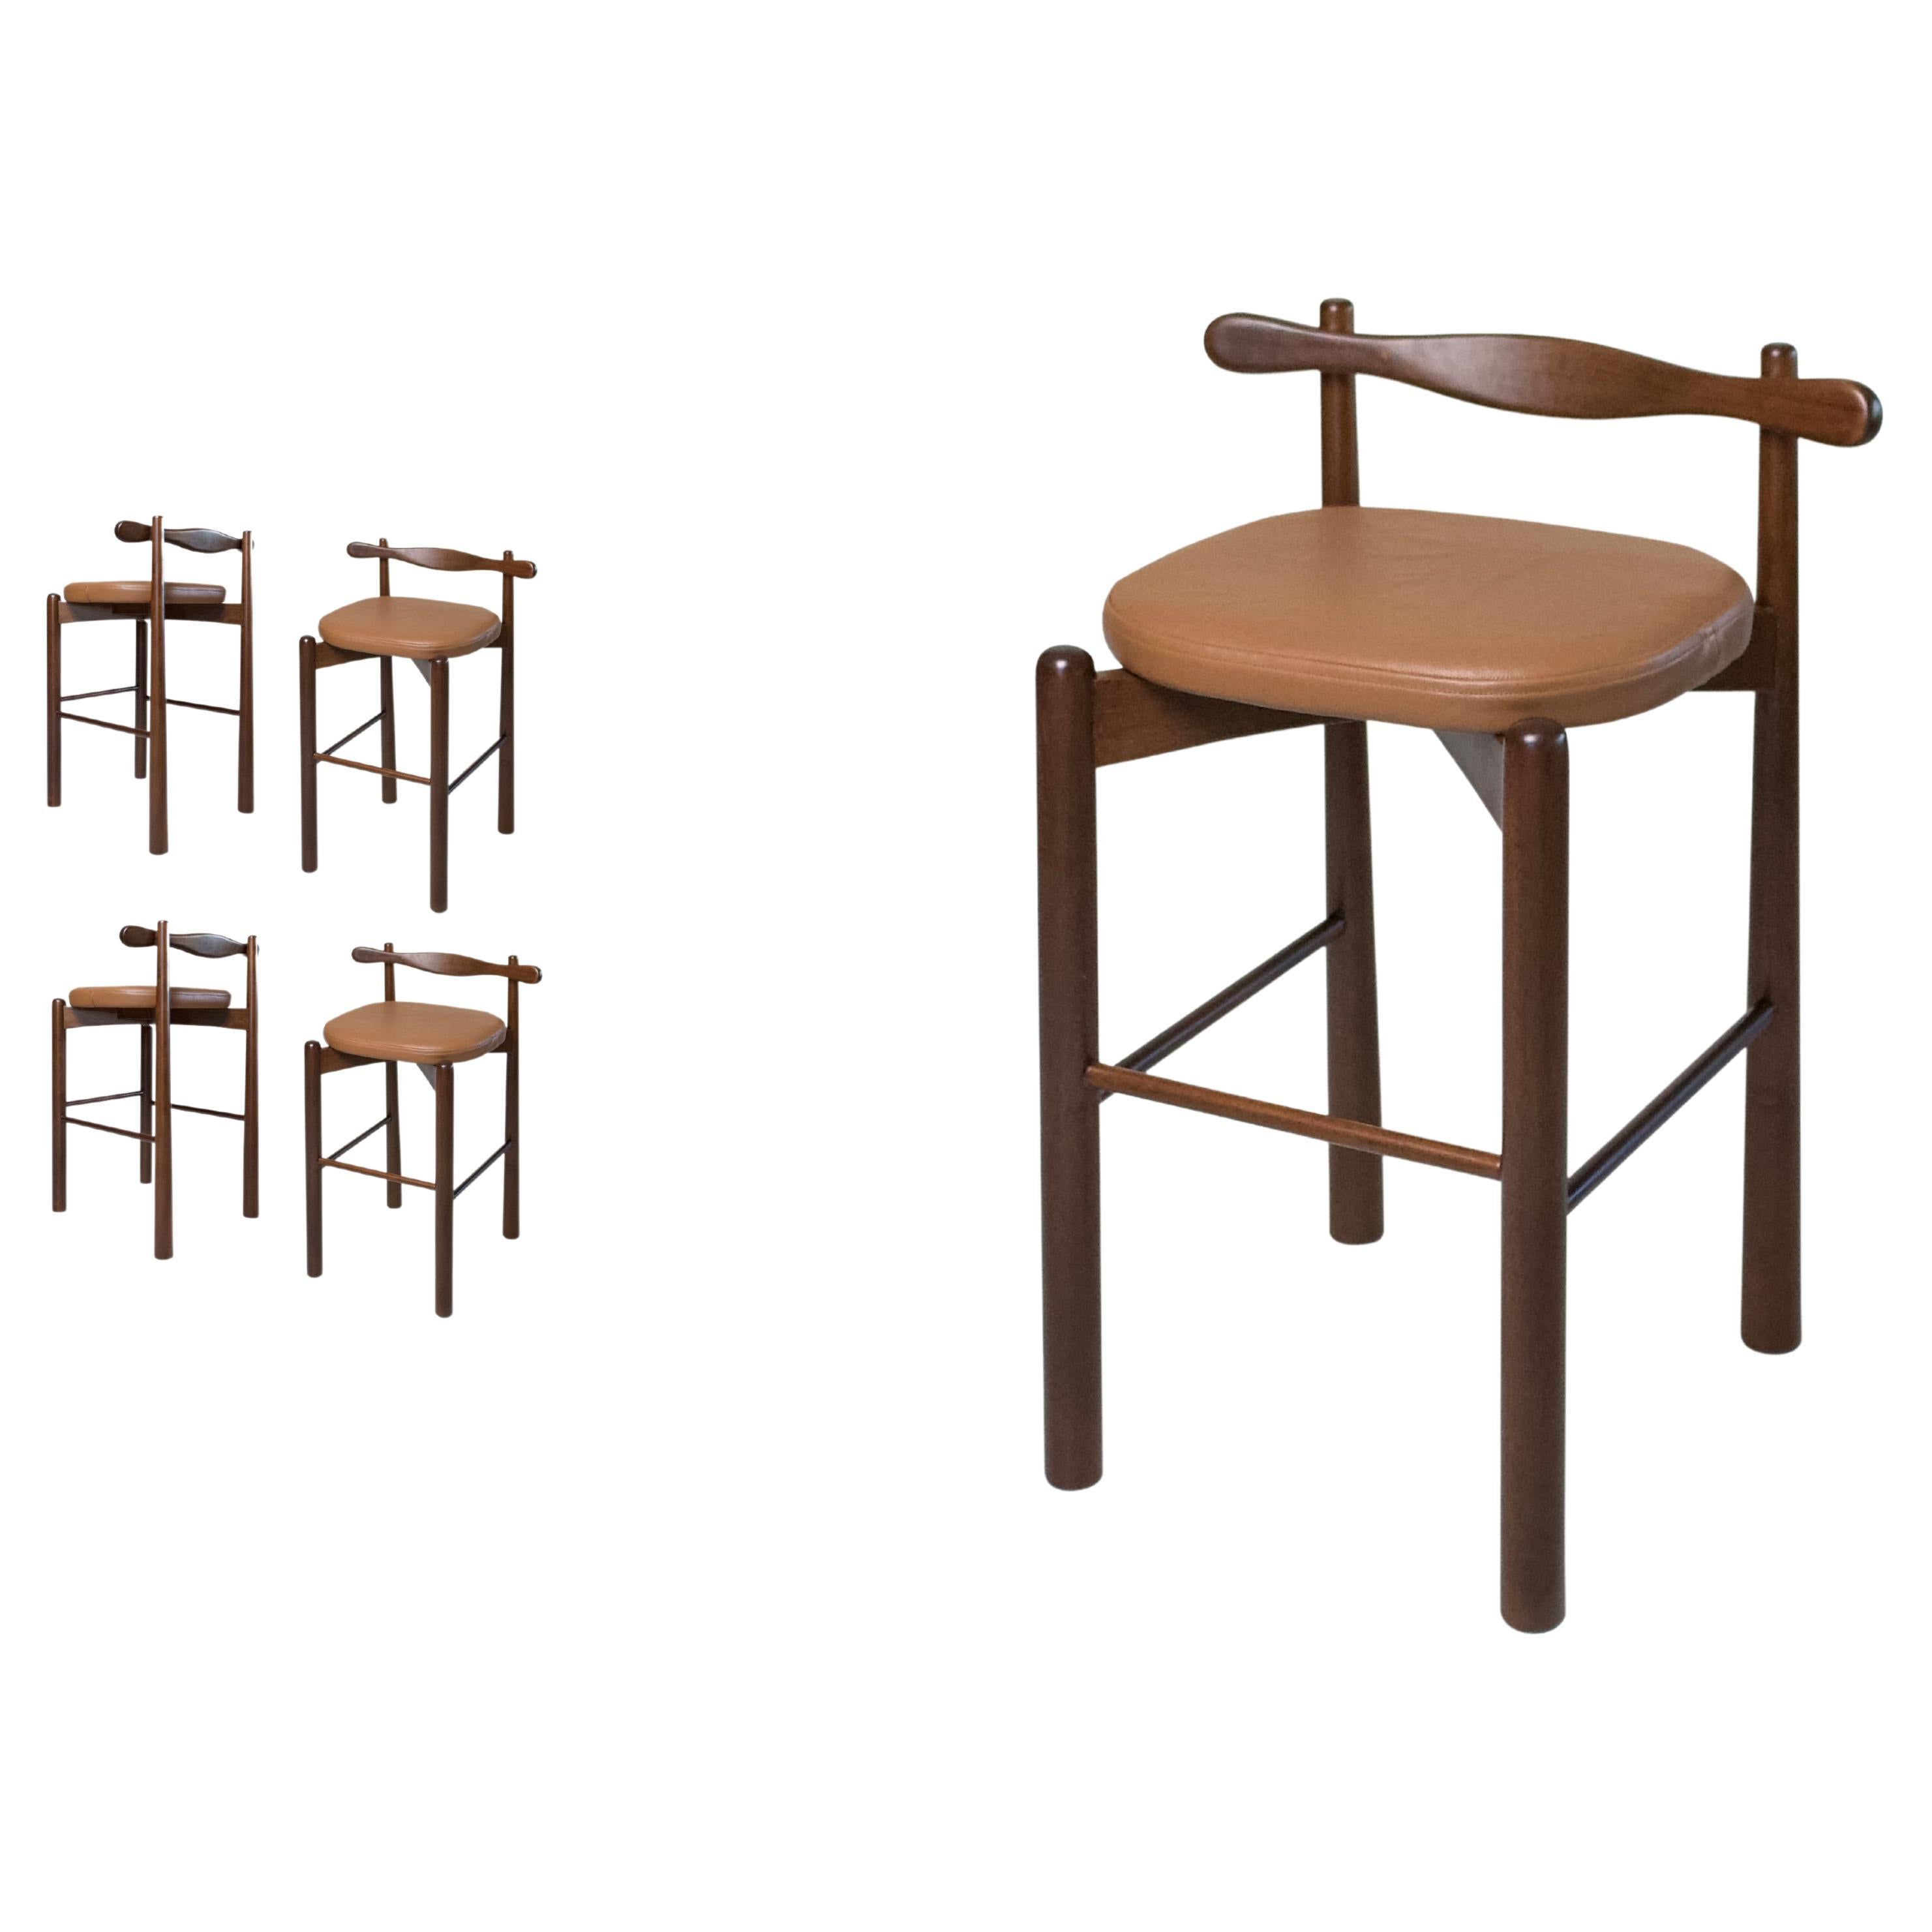 Set of 4 Counter Stools Uçá - Dark Brown Wood (fabric ref : F08) For Sale